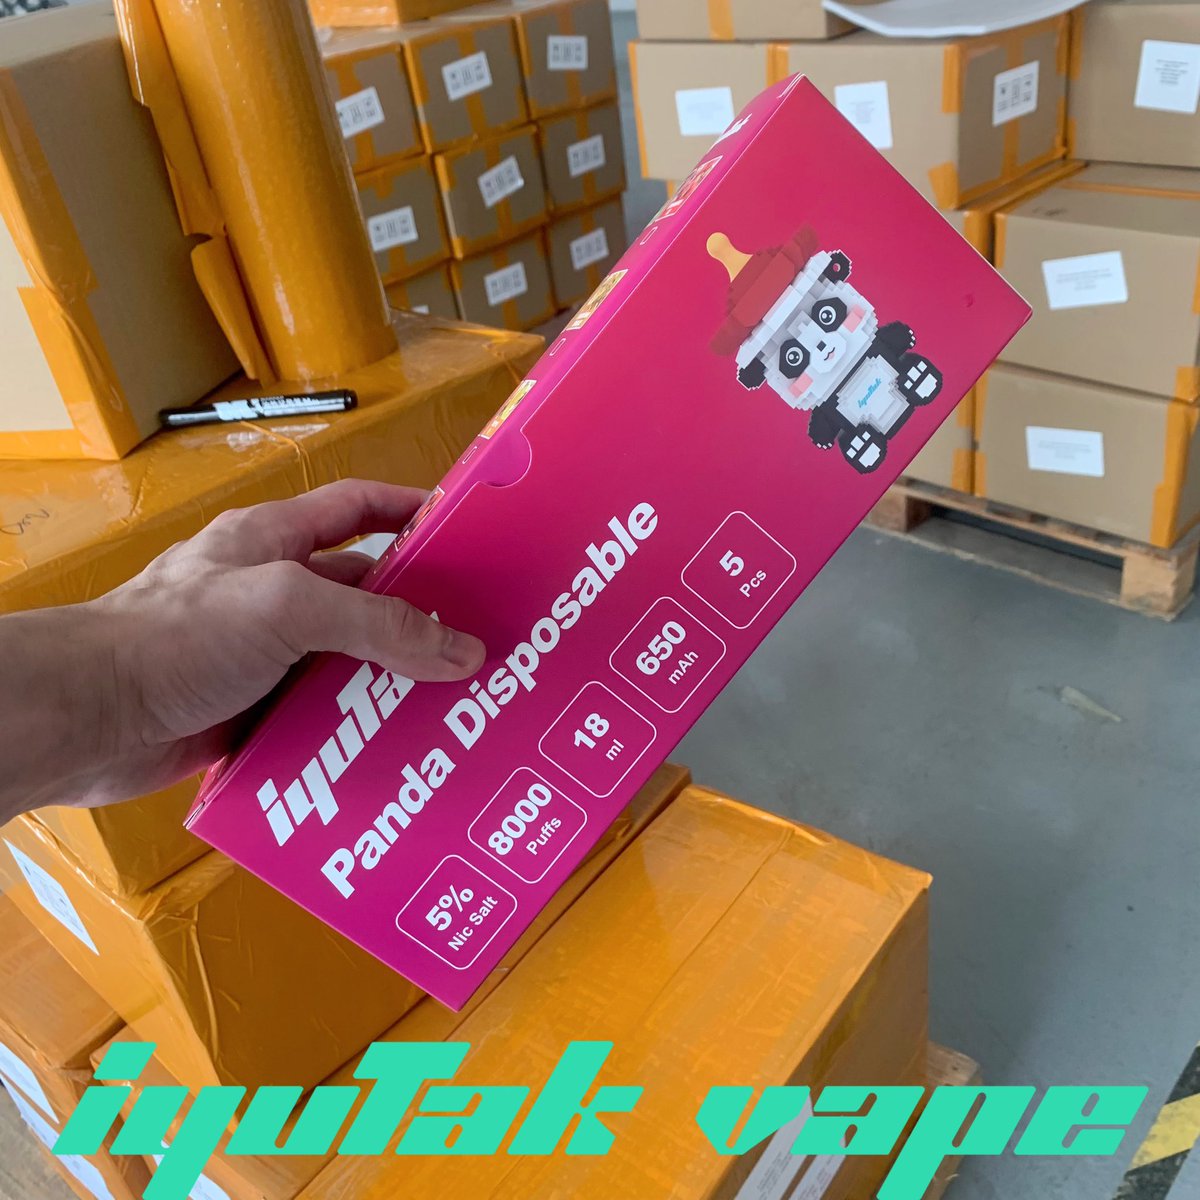 12000 visible 20ml e-liquid , cool product leads a easy way 😍😍 These 20k pcs is ready for 🇲🇾 #vapewholesale #vapeshop #ecig #disposablevape #voltbar10000puffs #10000puffs